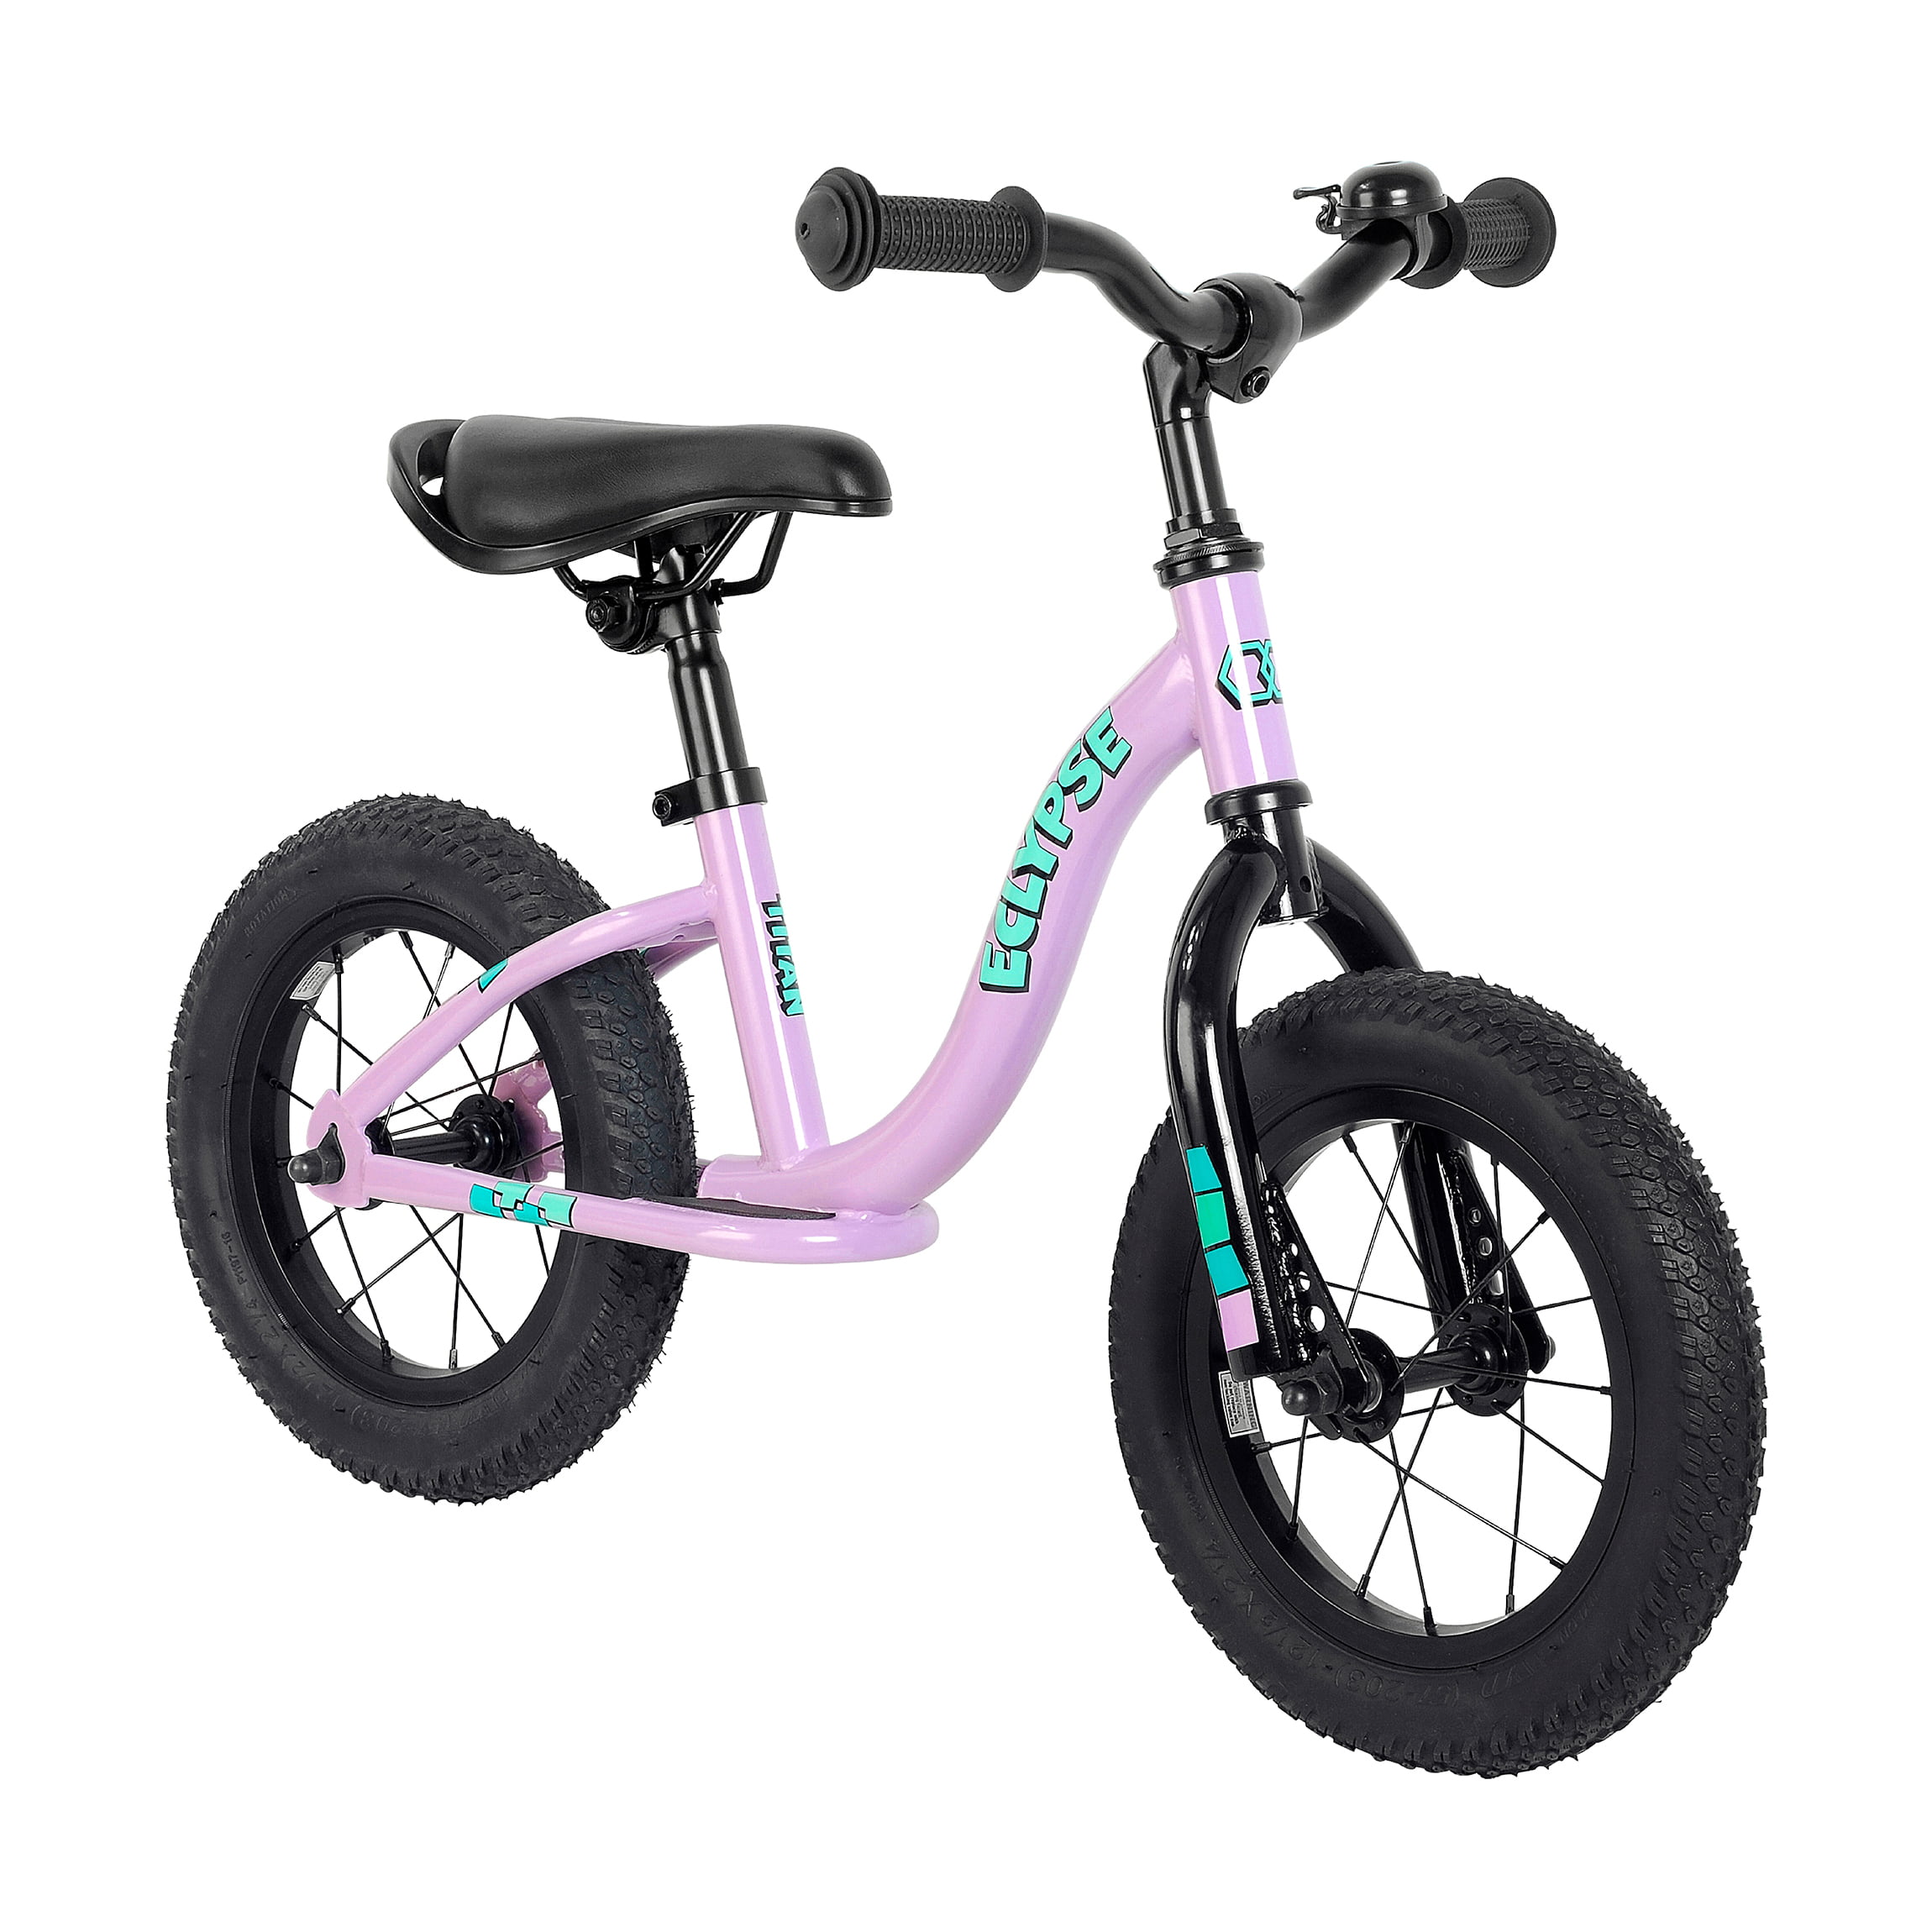 14 16 inch Balance Bike for 3-8 Years Old Boy Girls,Lightweight Toddler Bike,Suitable for kids under 4.2 feet,Outdoor Ride On Toys Gifts For Birthday. 